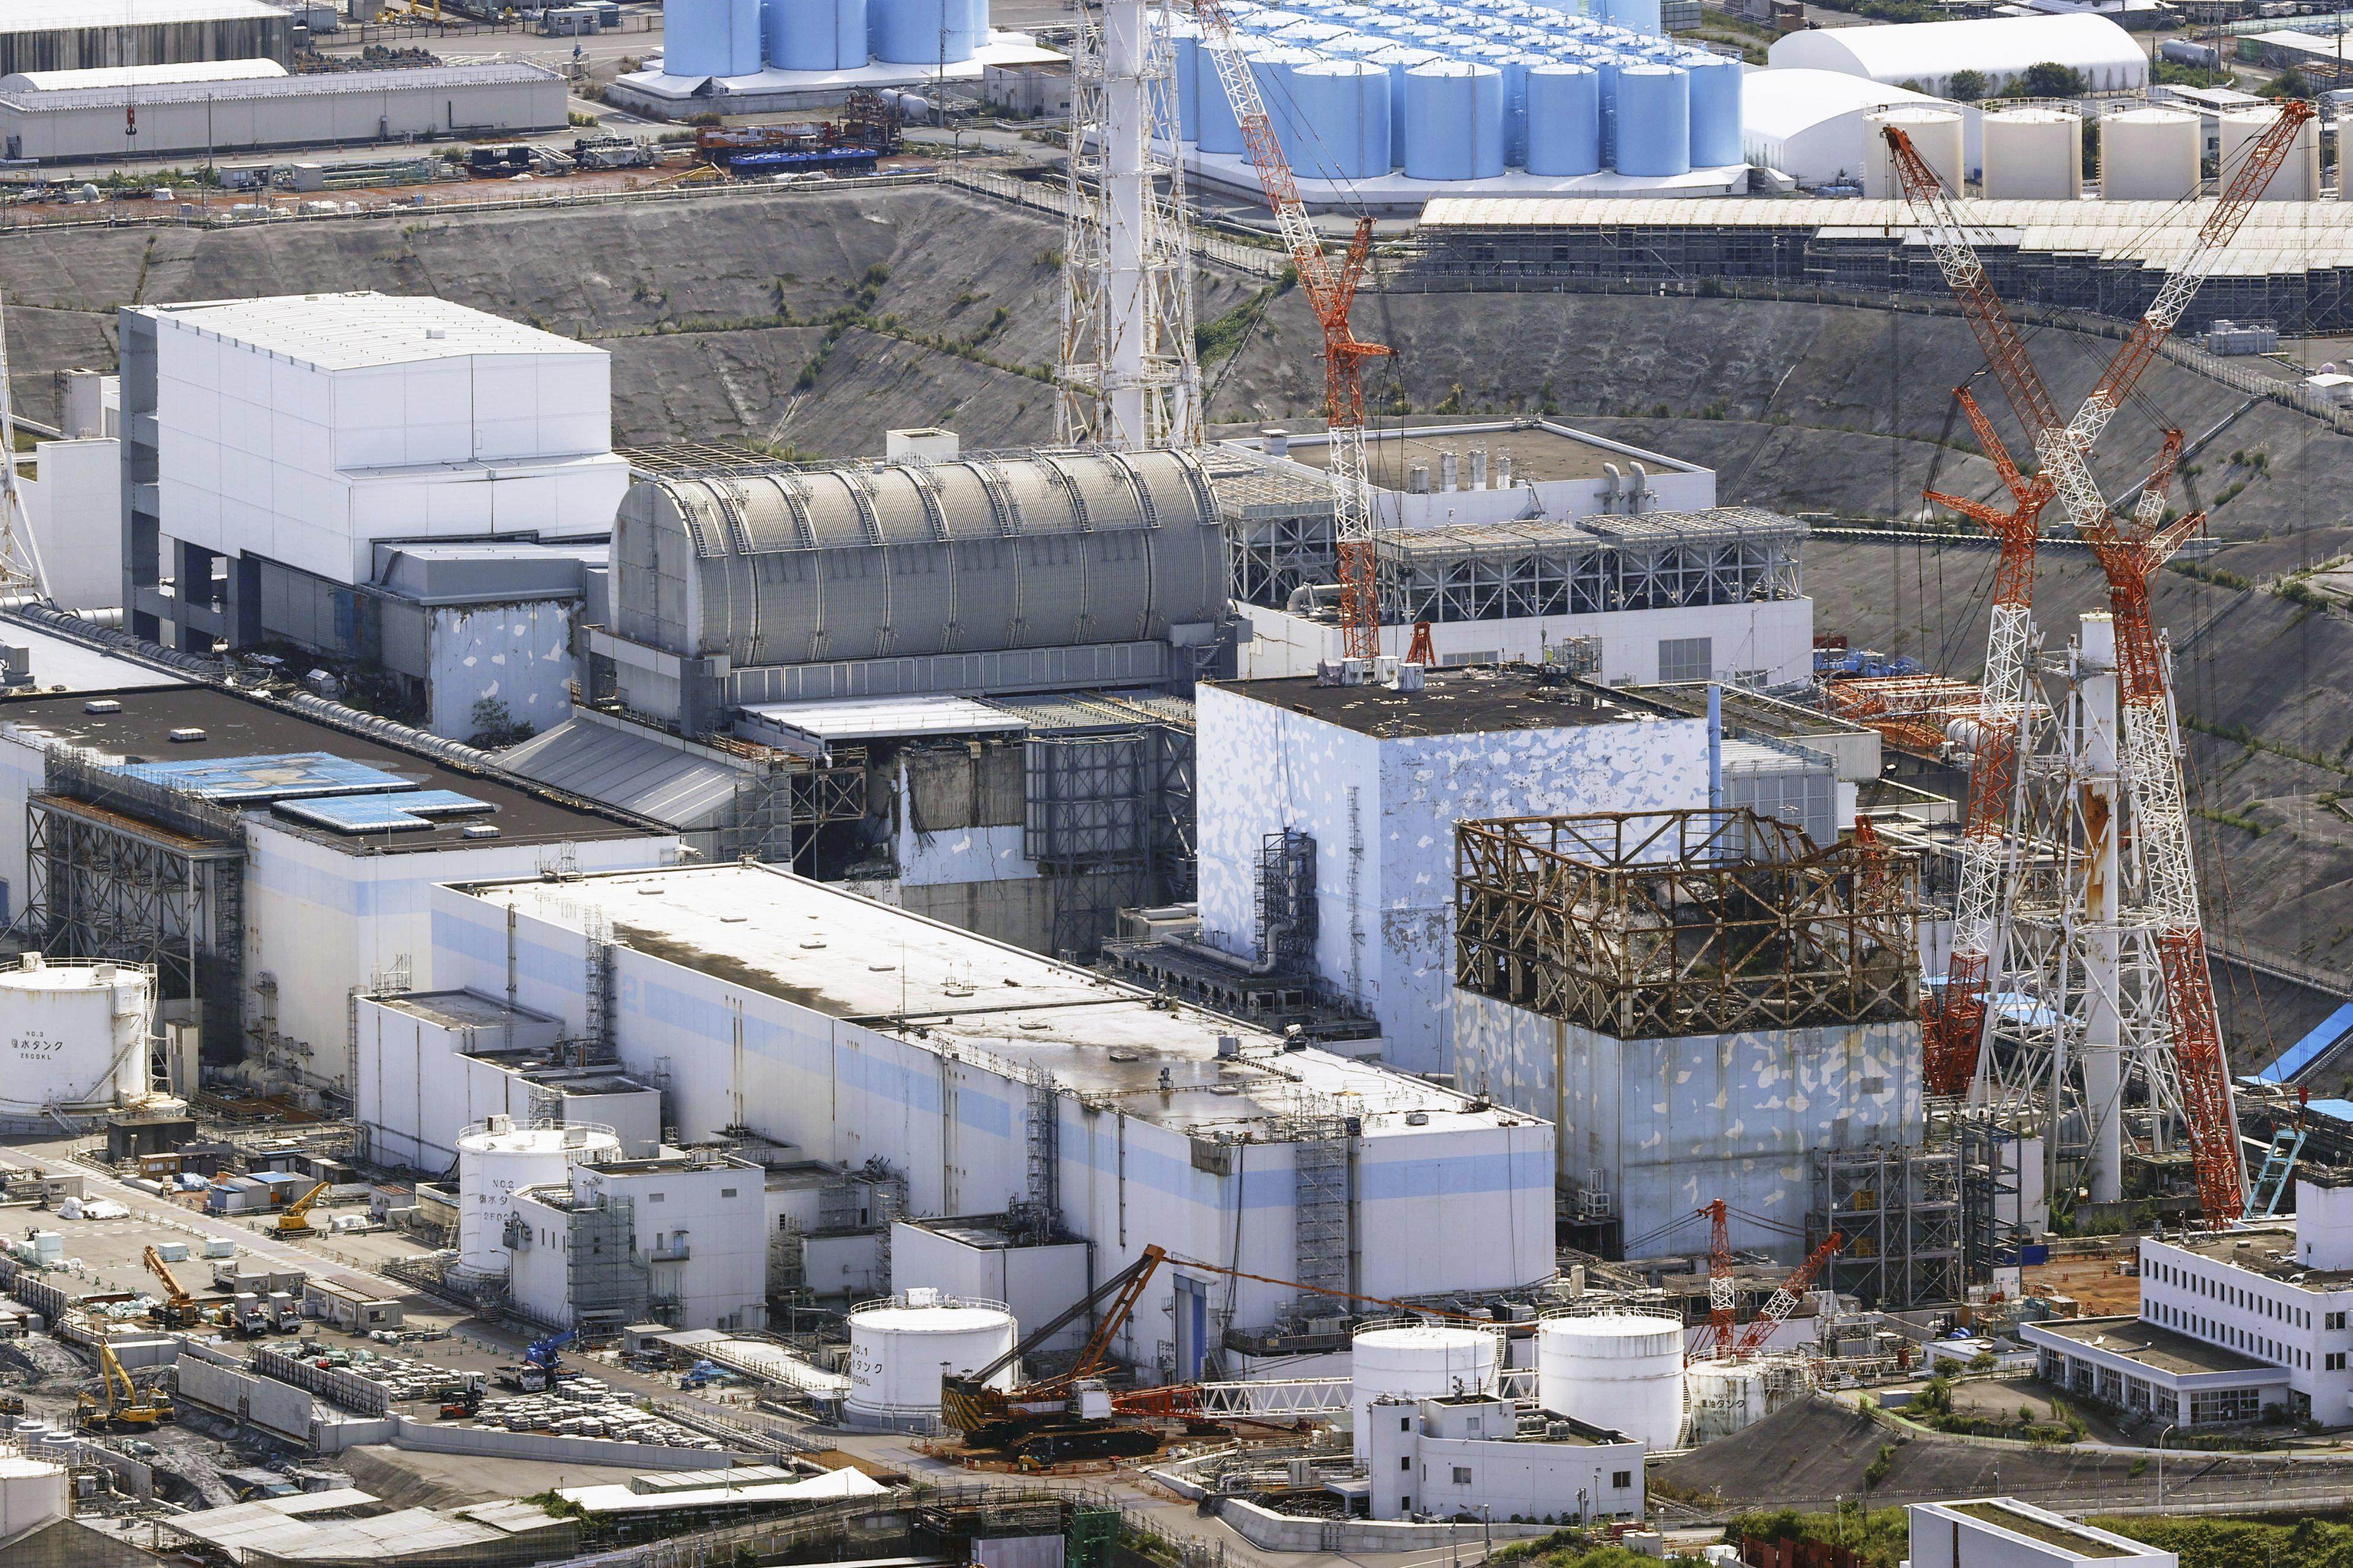 The reactor buildings of the Fukushima Daiichi nuclear power plant in Fukushima Prefecture in August 2022. Photo: Kyodo News via AP